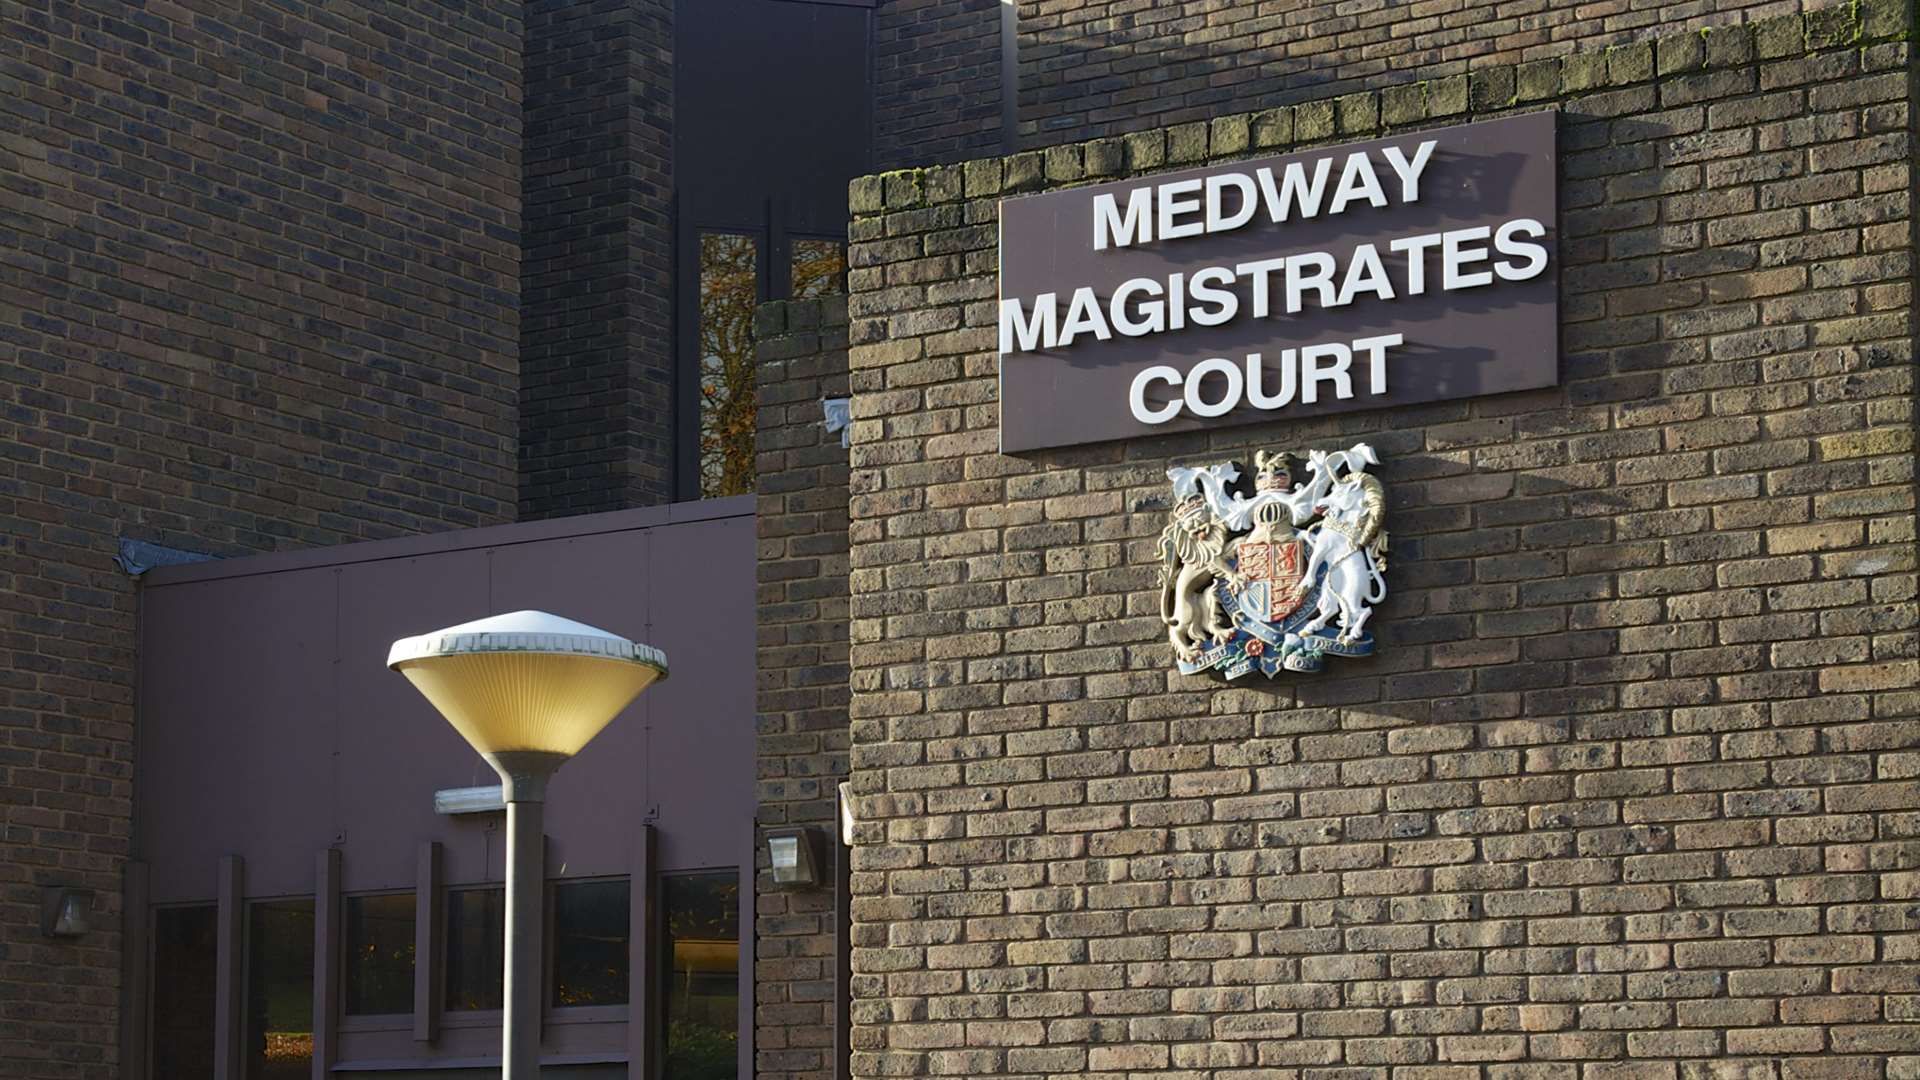 The case was heard at Medway Magistrates' Court